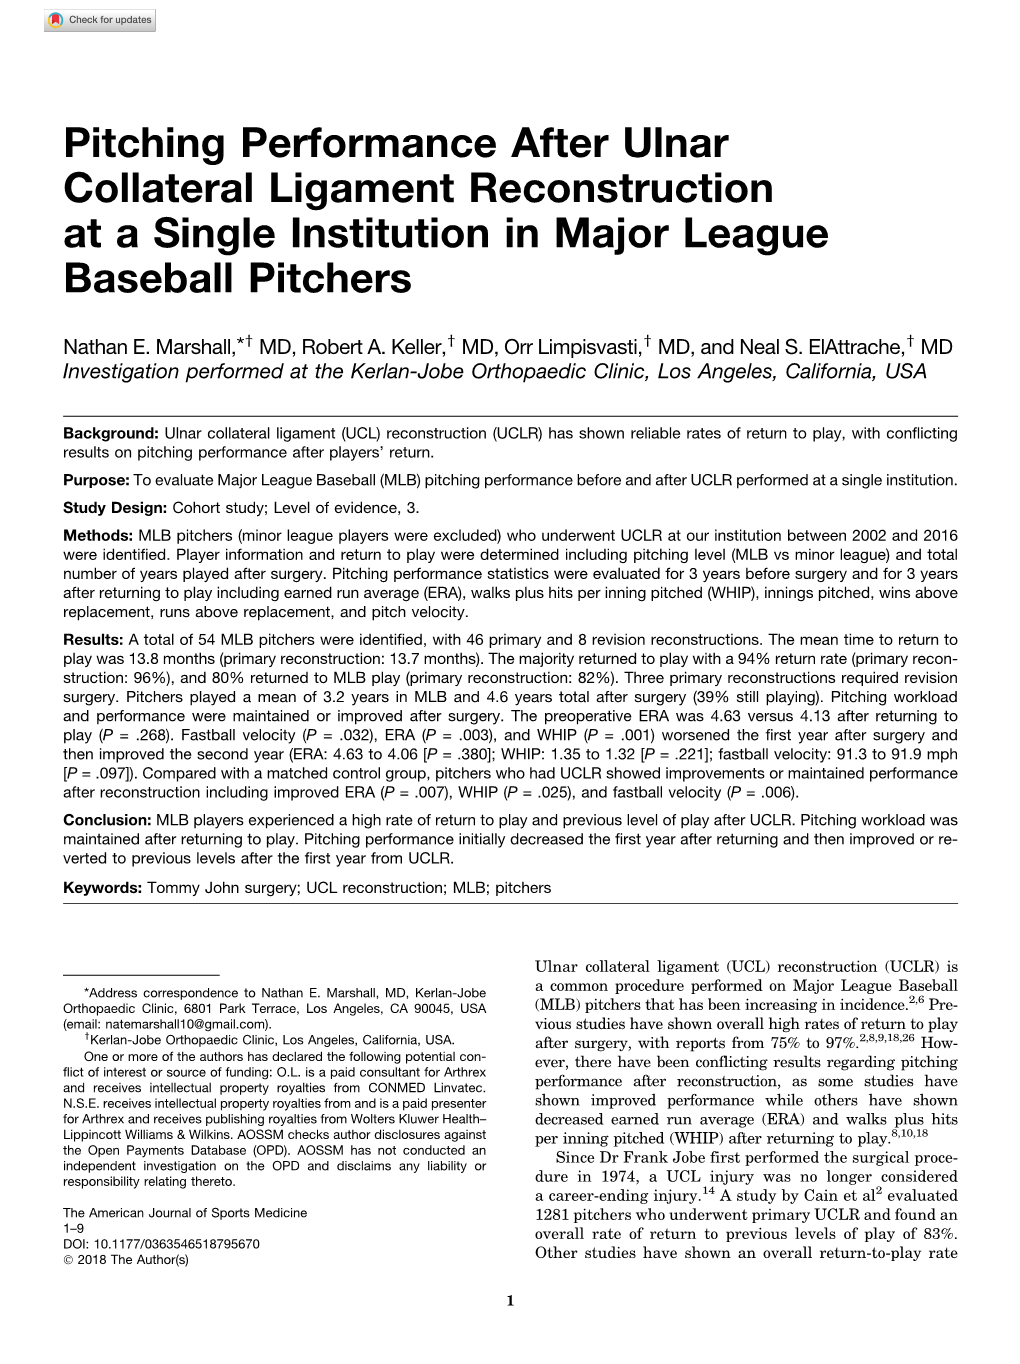 Pitching Performance After Ulnar Collateral Ligament Reconstruction at a Single Institution in Major League Baseball Pitchers